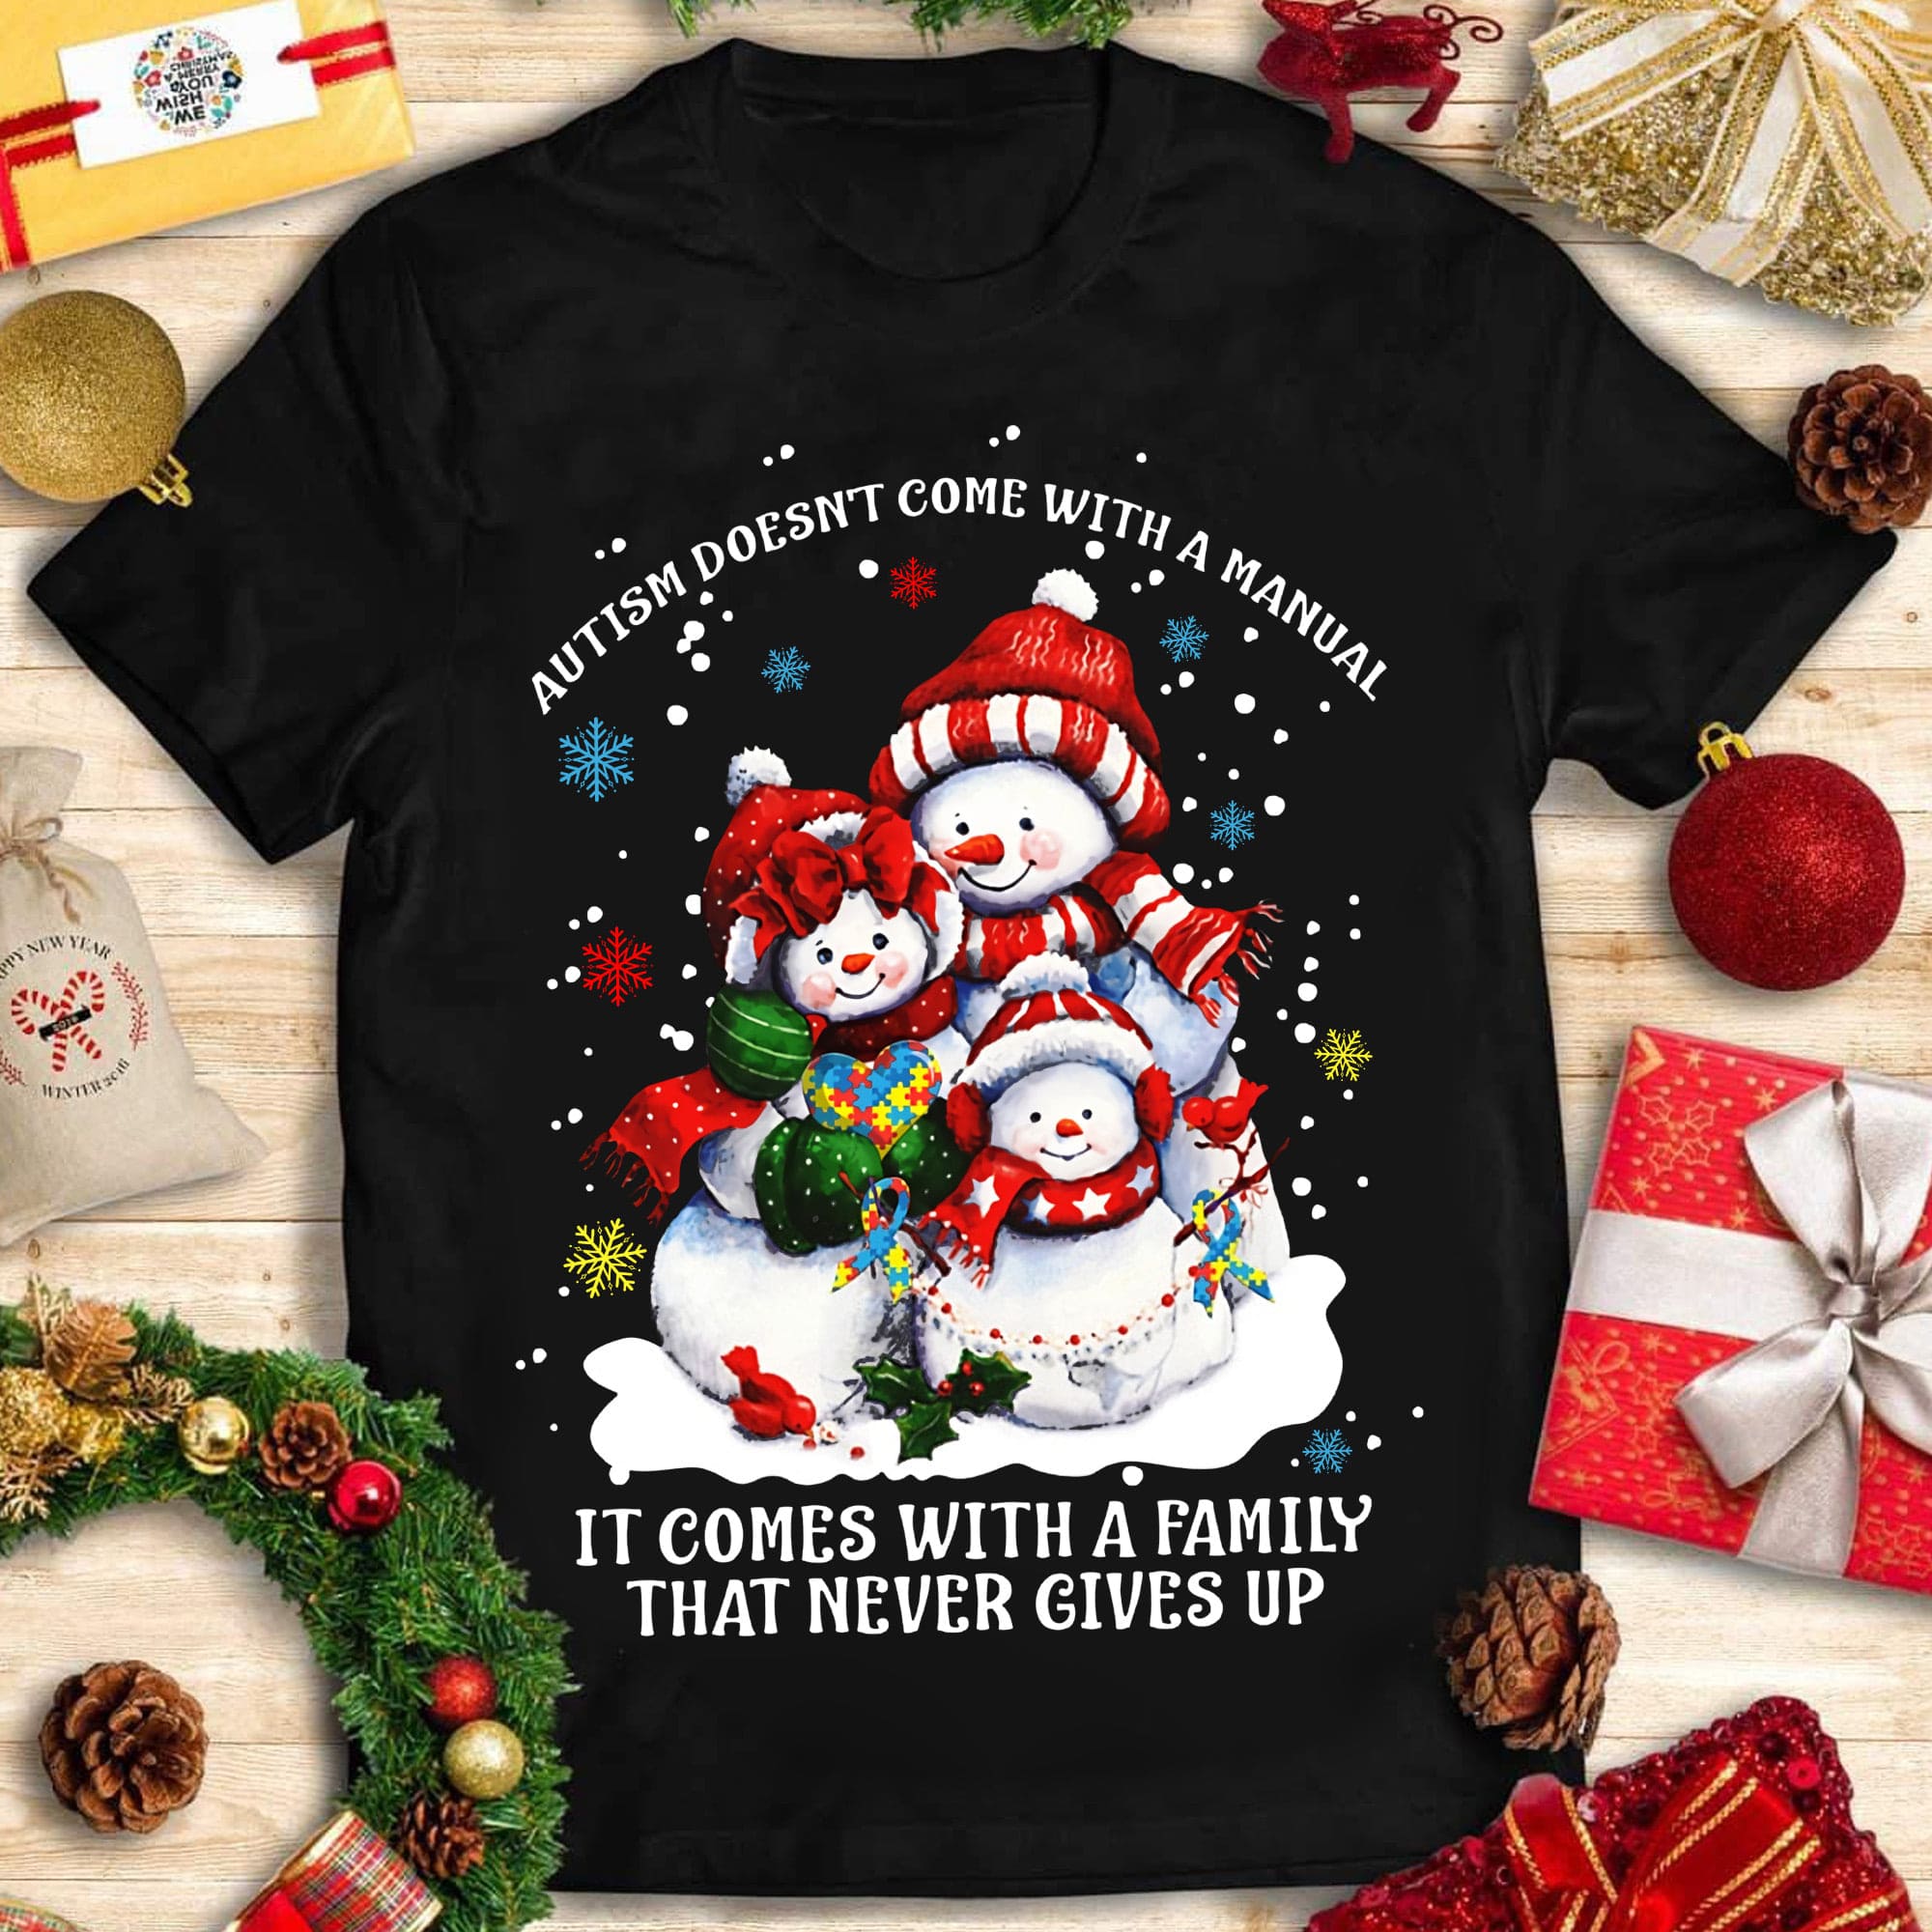 Autism Snowman Family - Autism doesn't come with a manual it comes with a family that never gives up